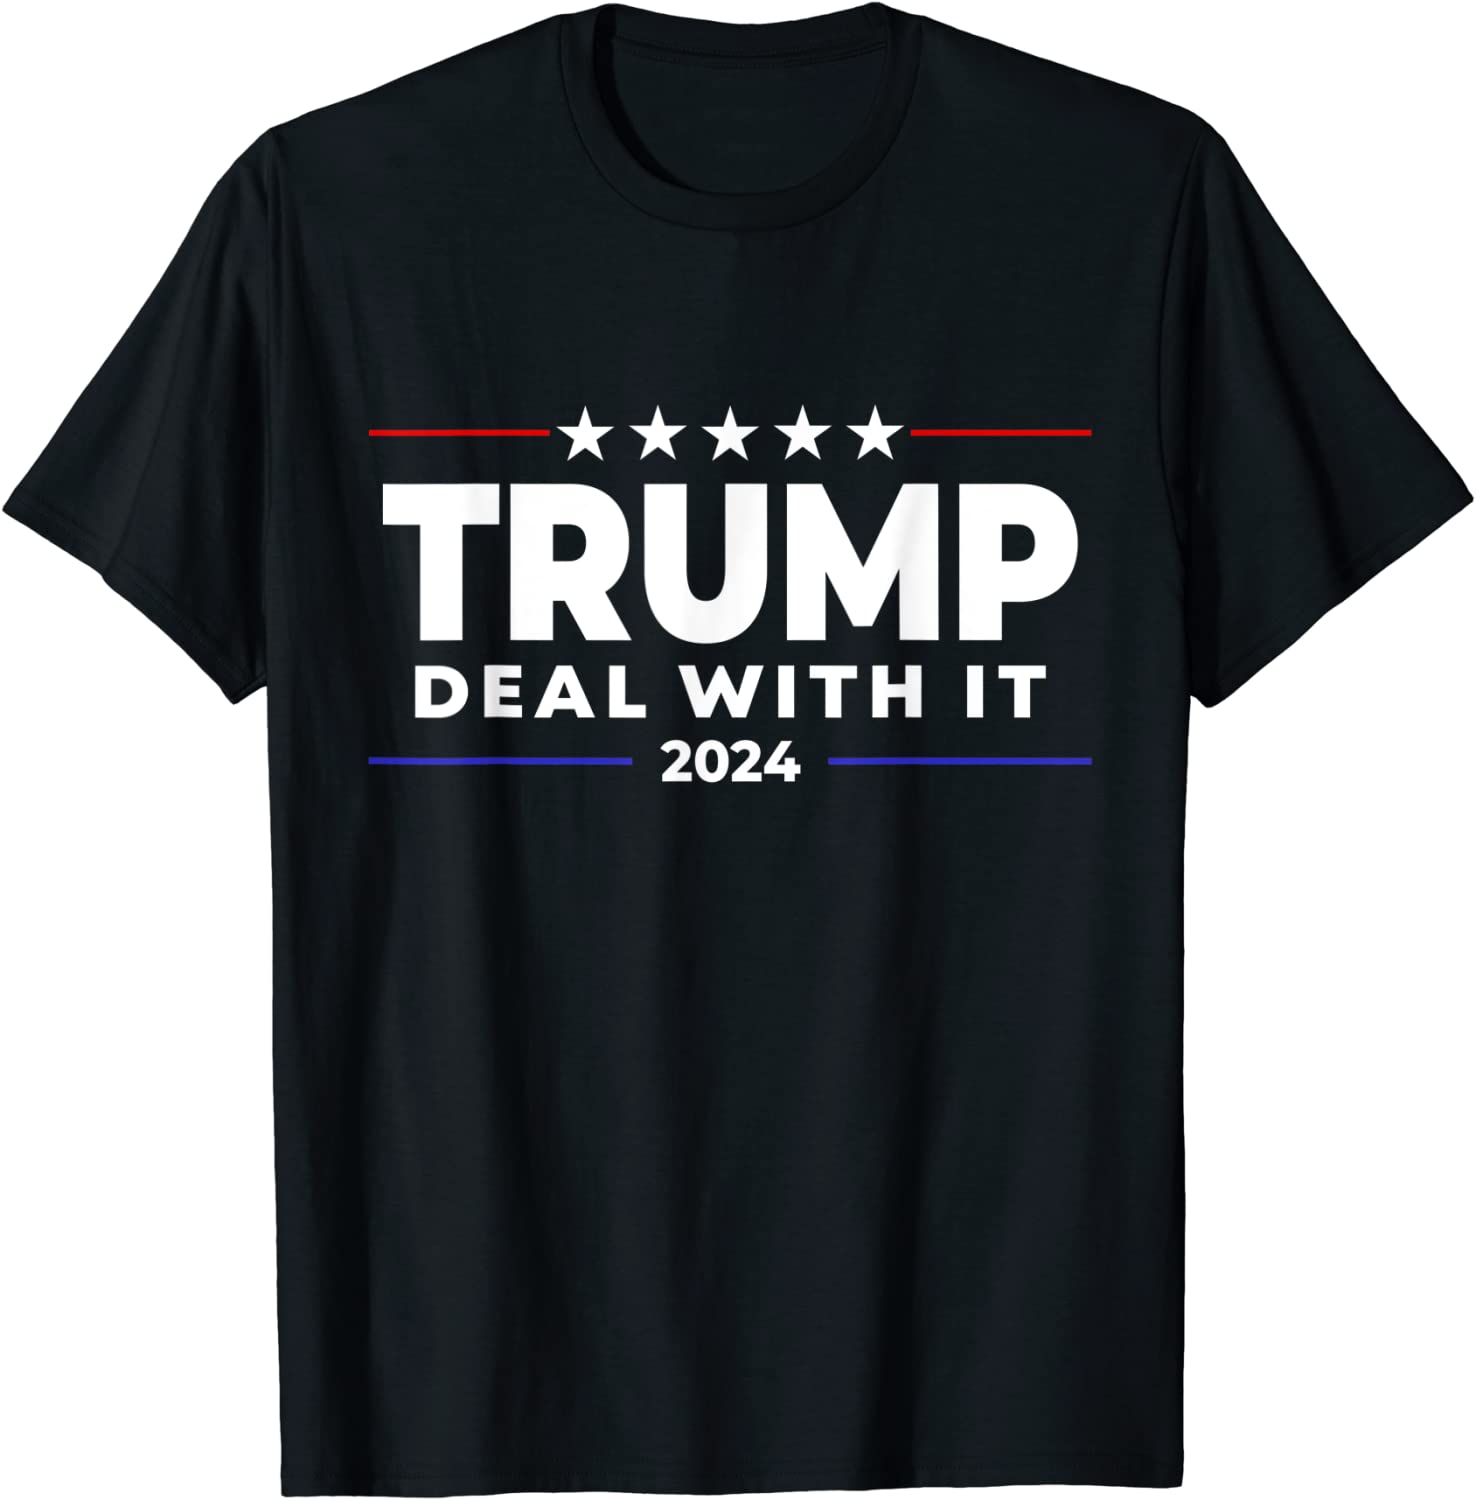 Trump 2024 Campaign Deal With It Tee Shirt ShirtElephant Office